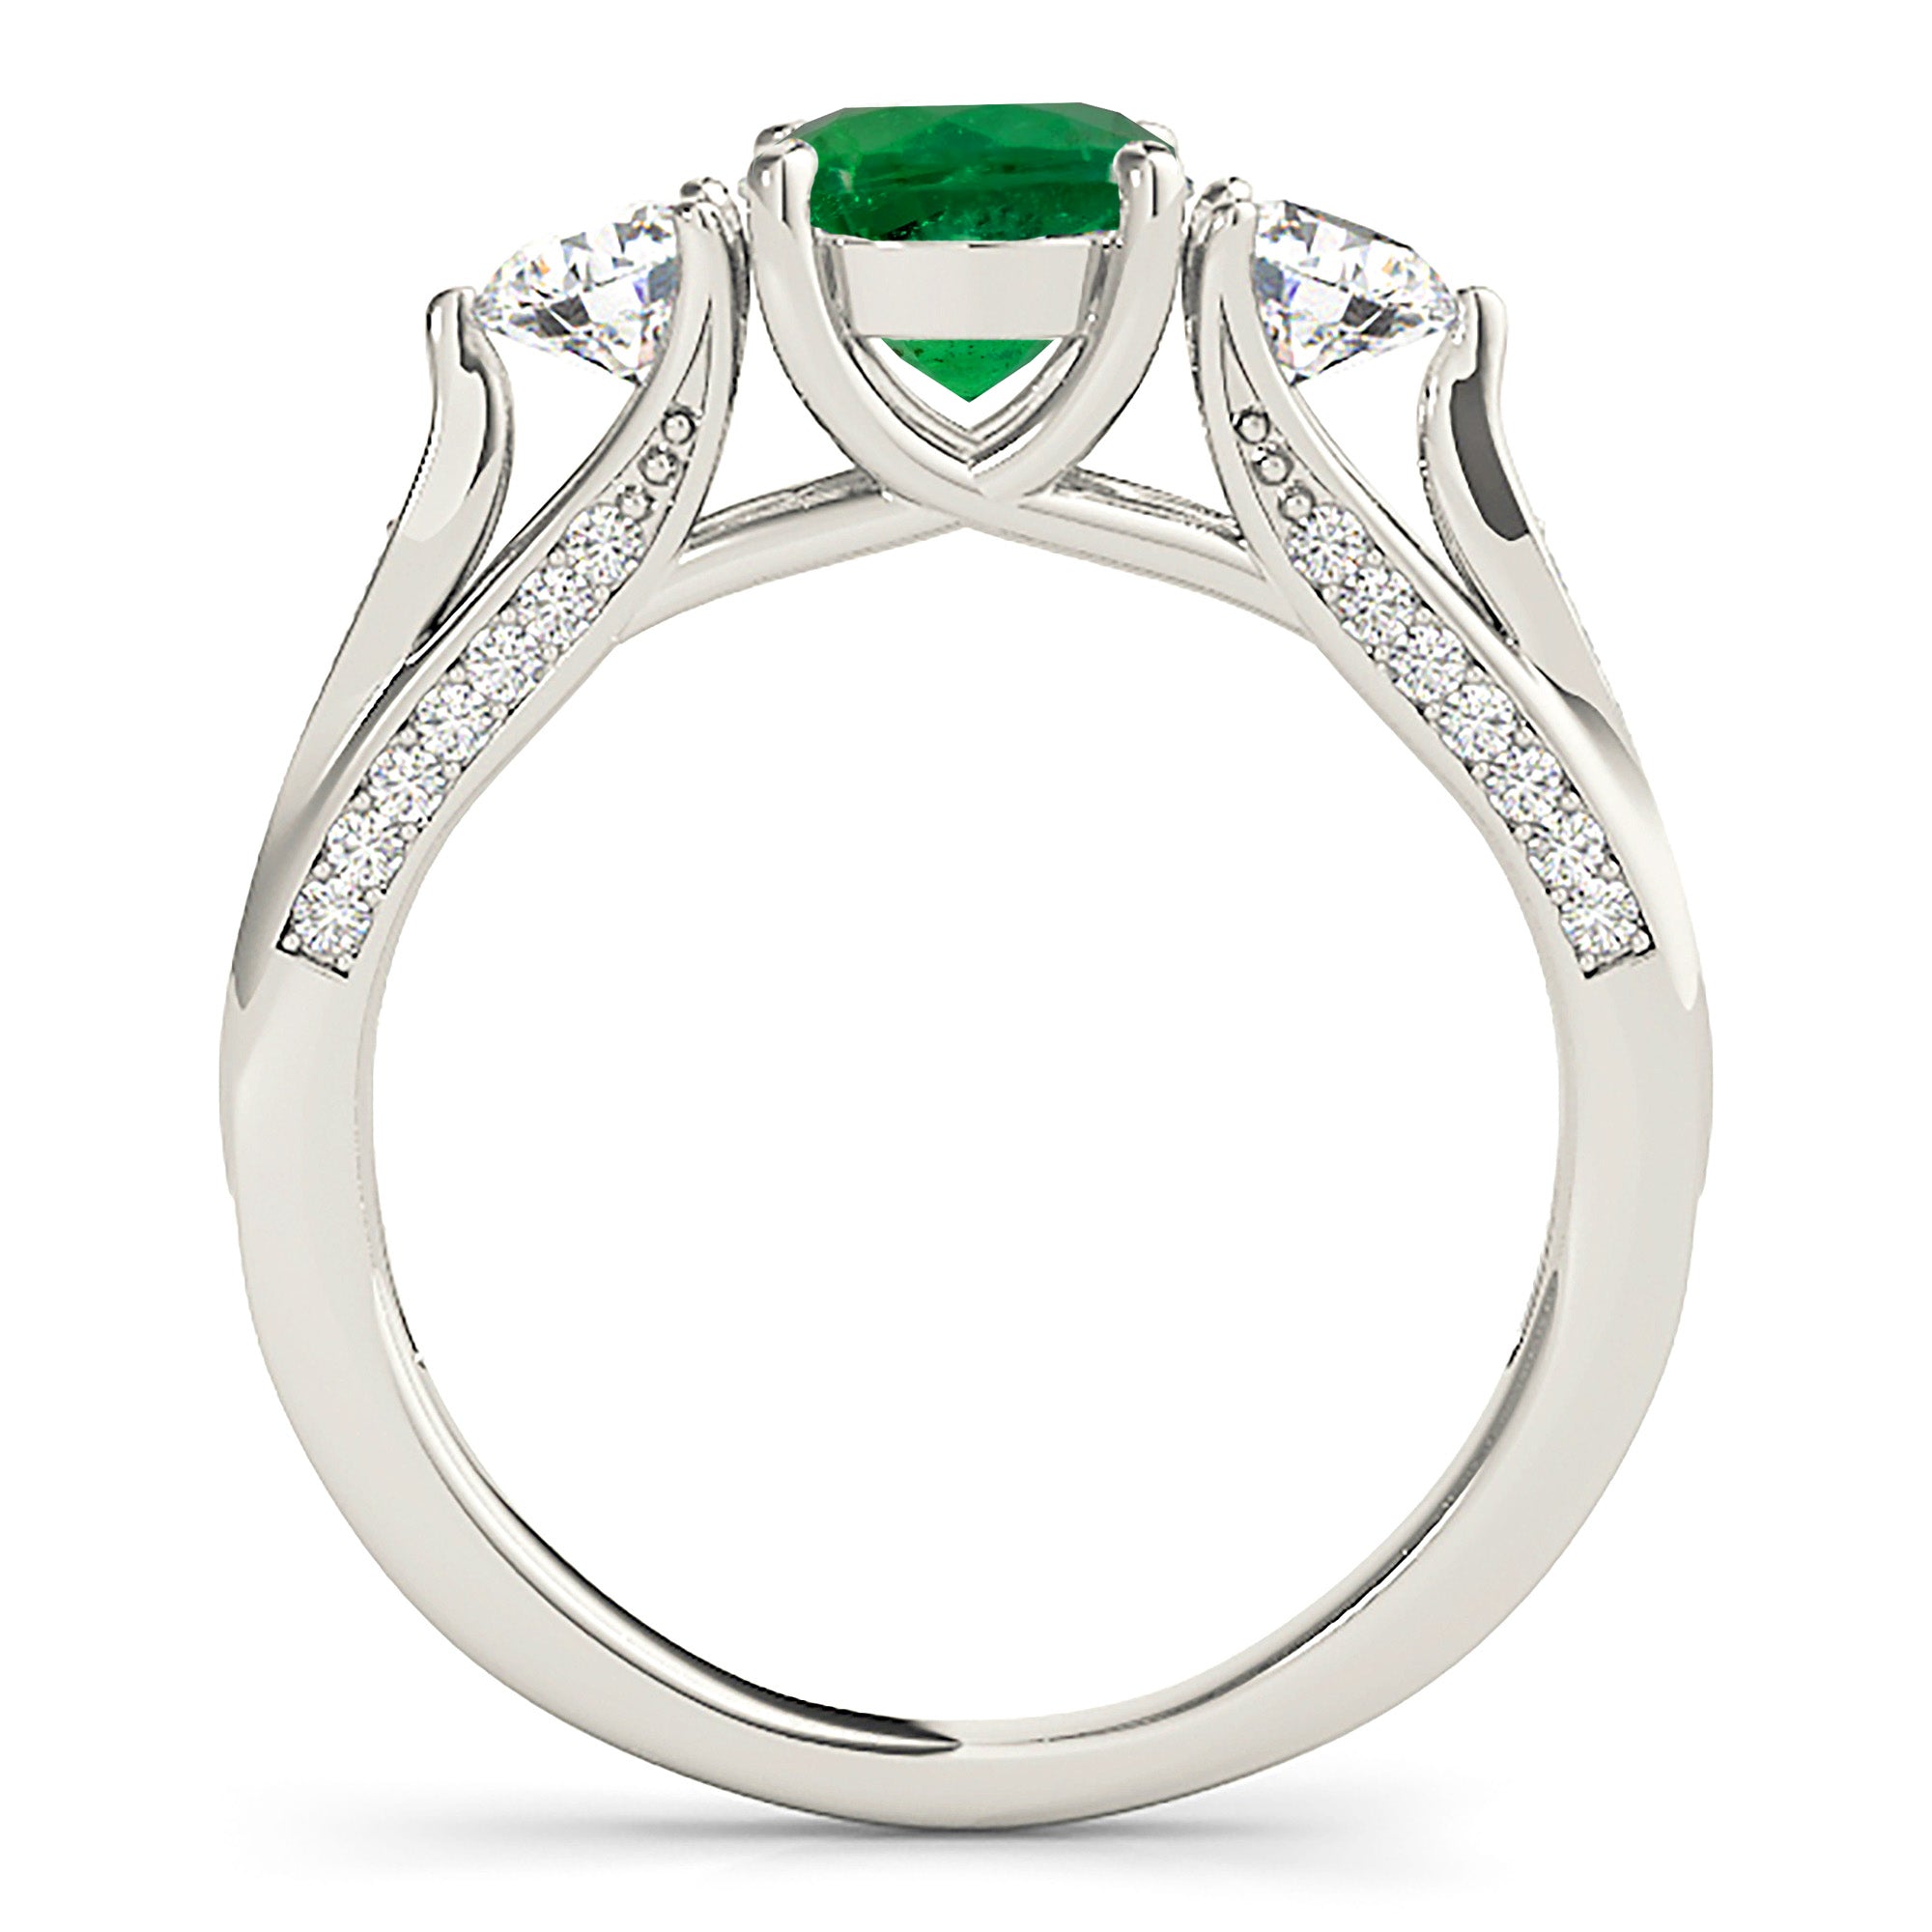 1.14 ct. Genuine Emerald Three Stone Ring With 0.75 ctw. Side and Accent Diamonds-in 14K/18K White, Yellow, Rose Gold and Platinum - Christmas Jewelry Gift -VIRABYANI